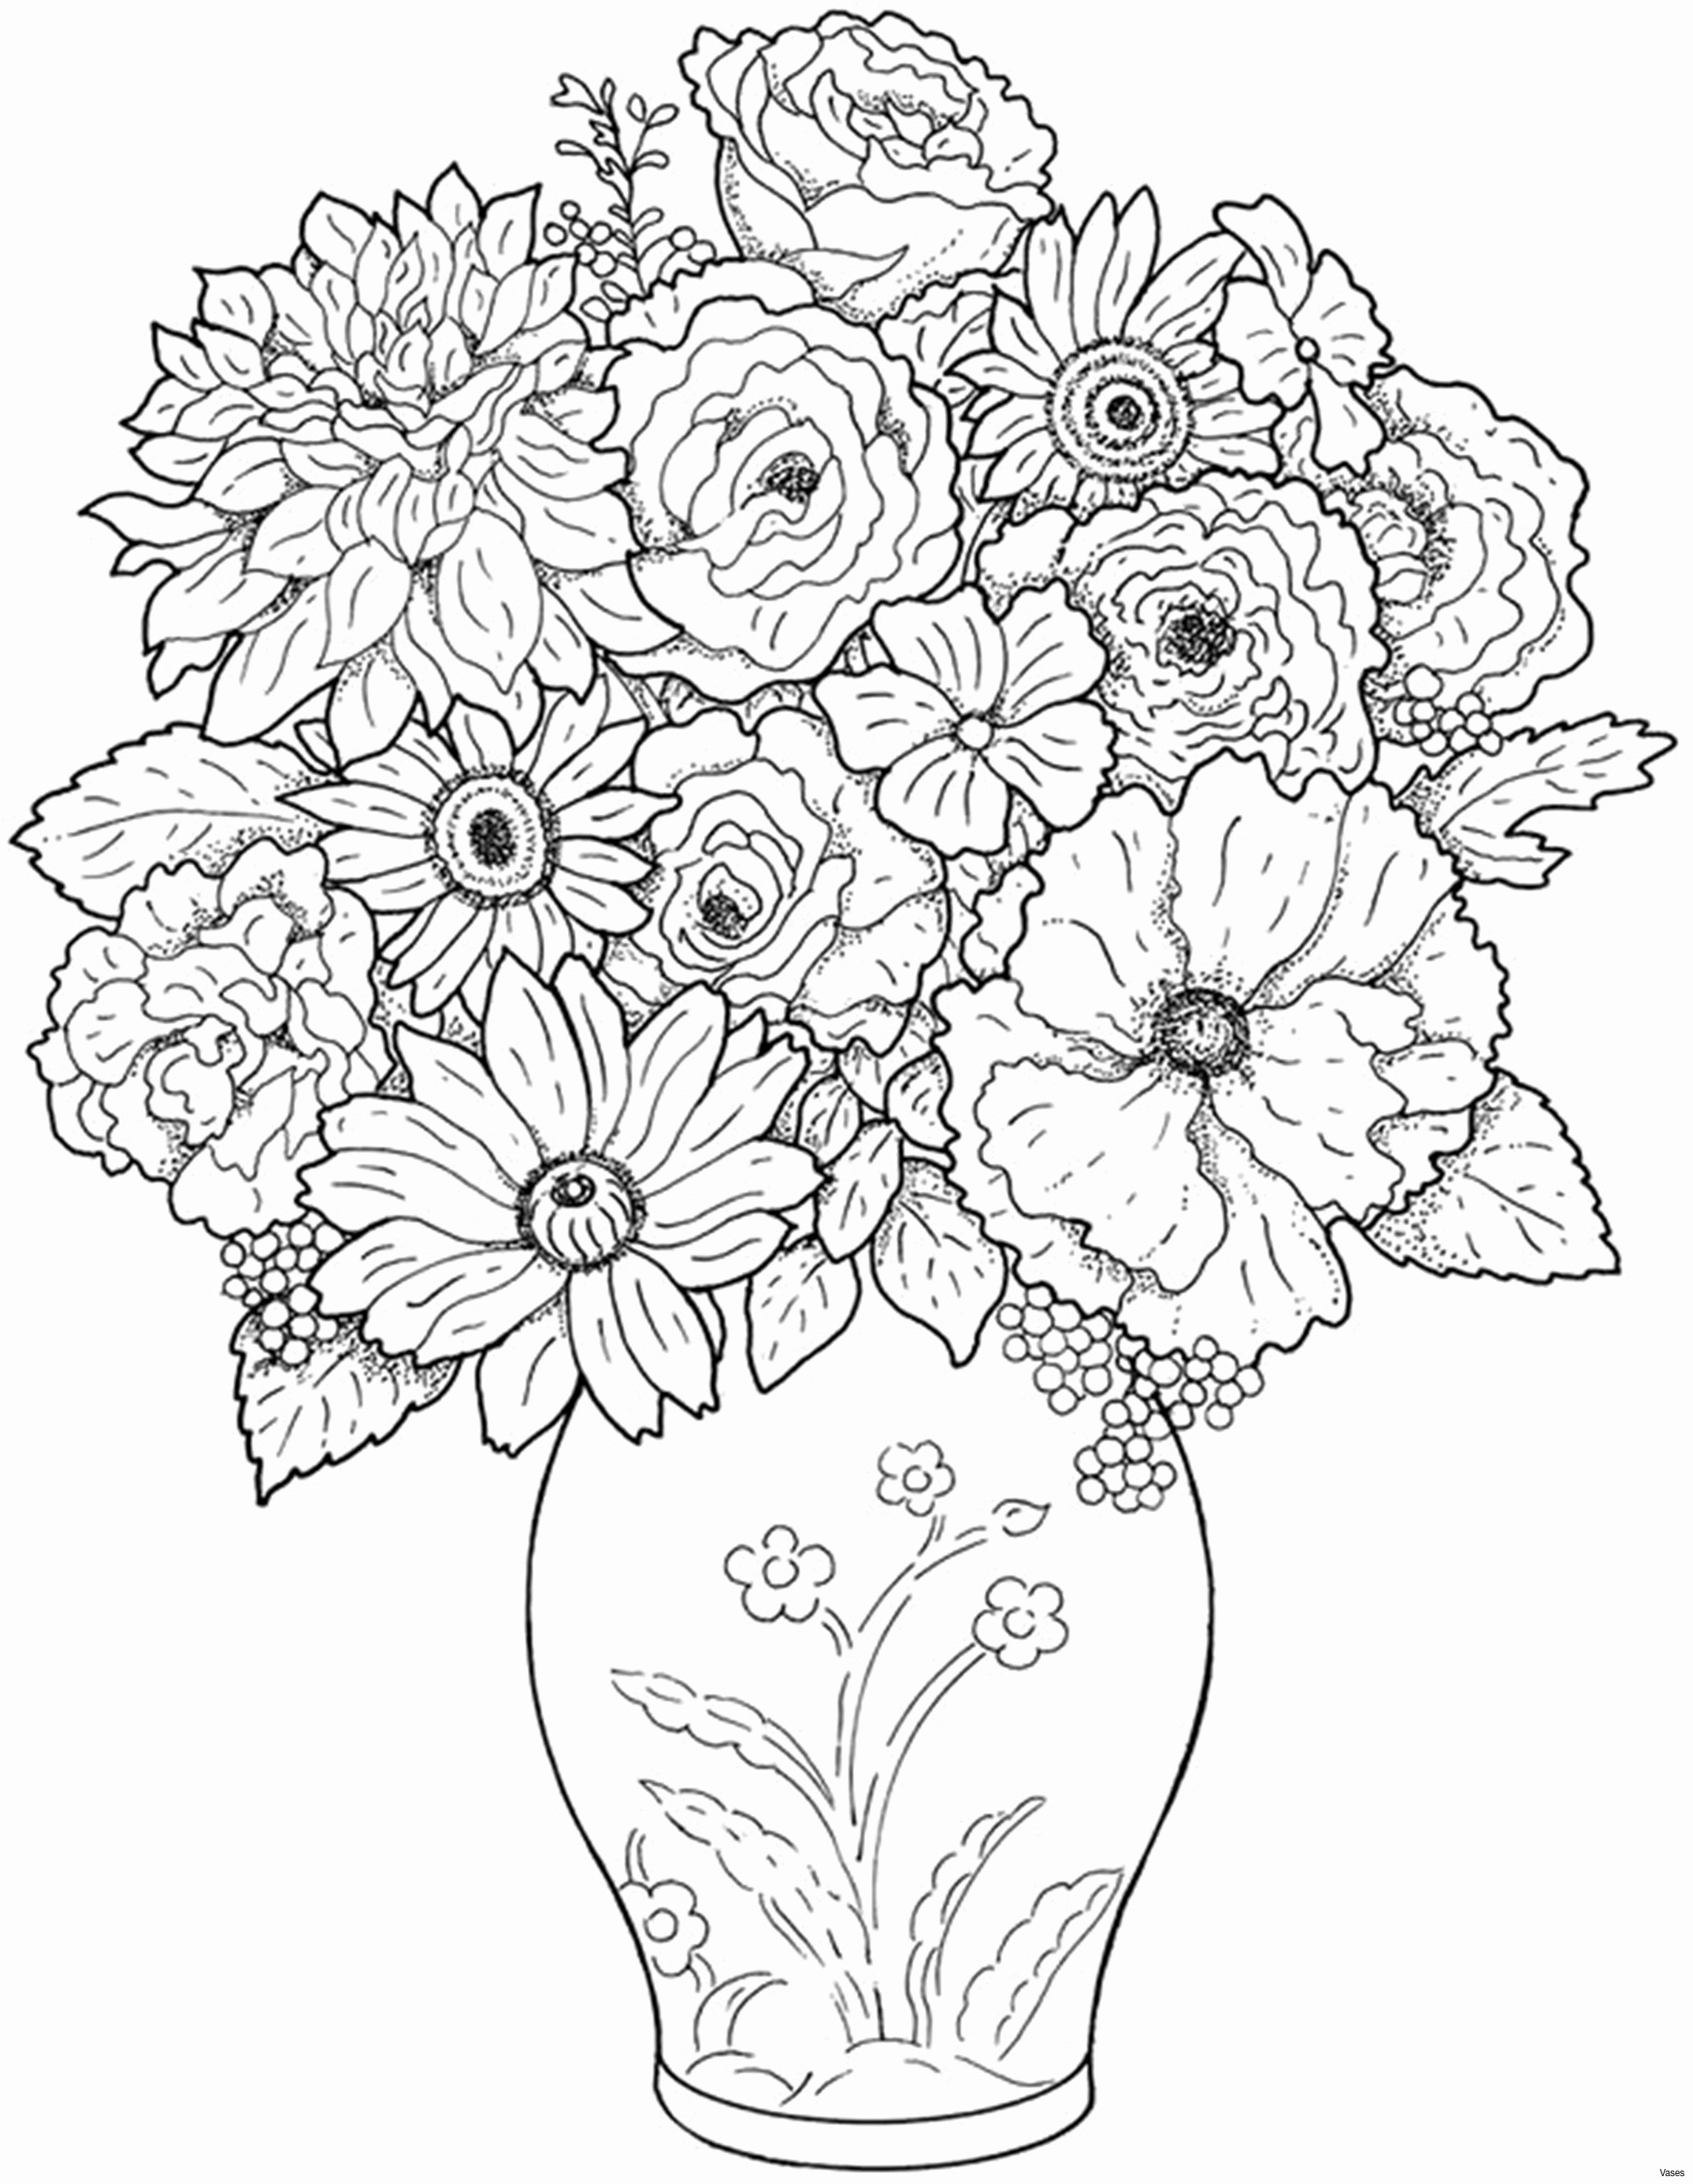 15 Stunning Rose Bouquet In Vase 2024 free download rose bouquet in vase of collection of flower vase coloring pages download them and try to inside coloring pages of flowers in a vase 2102695 1476478